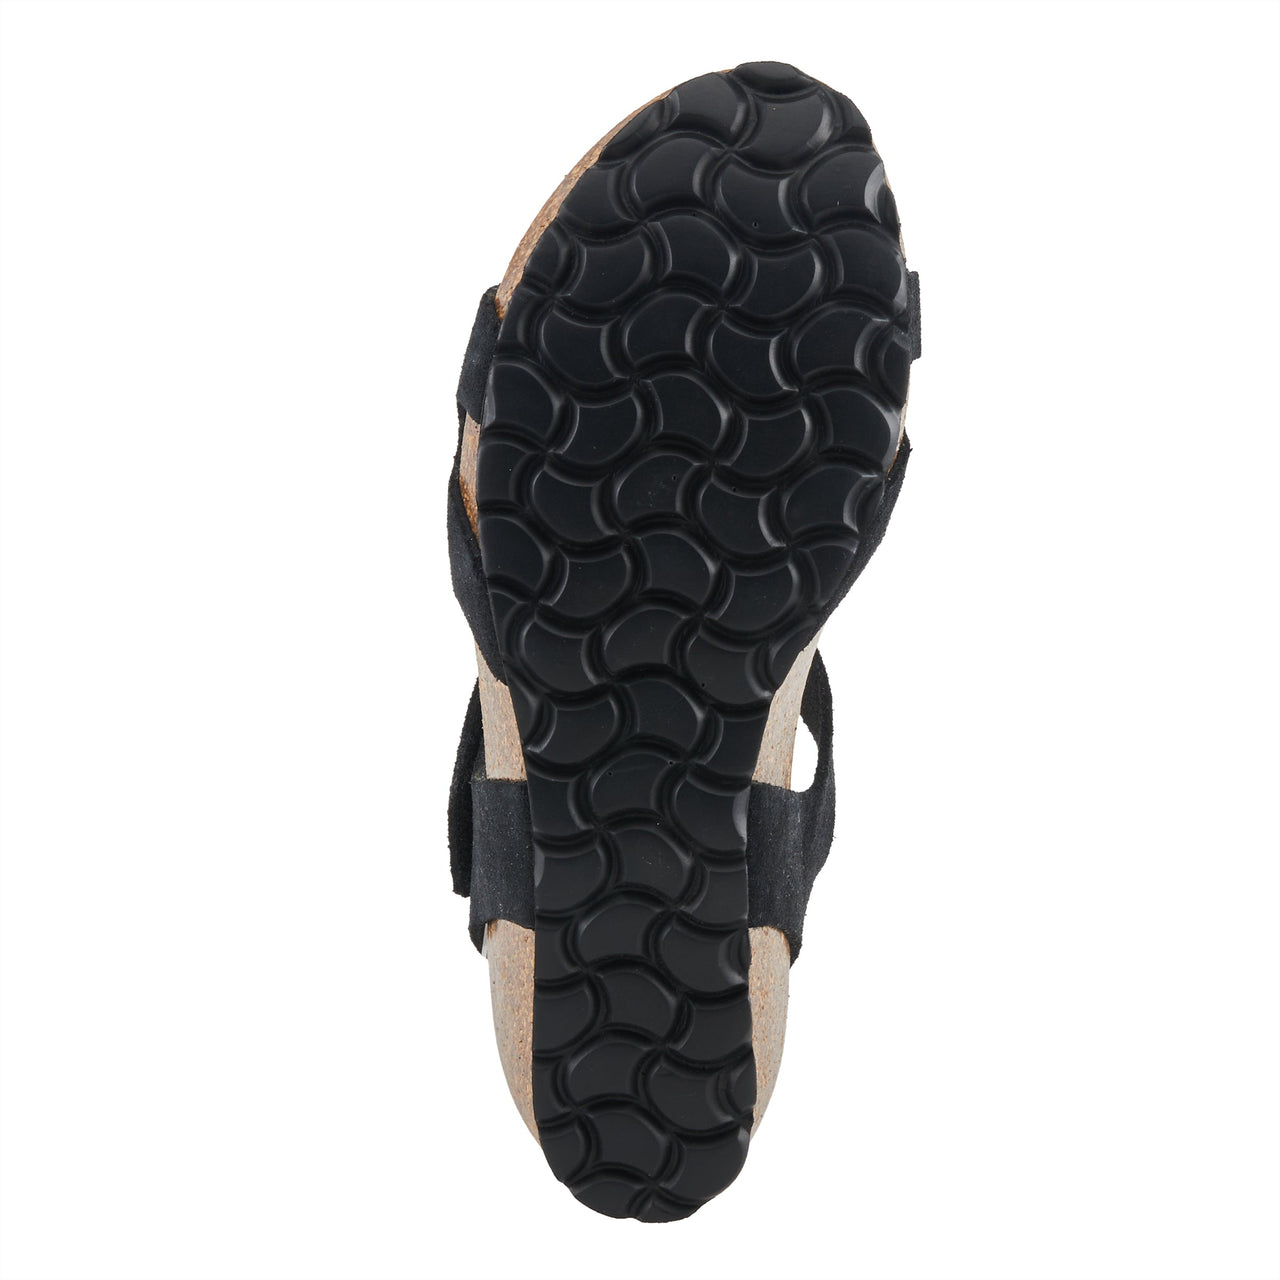 Spring Step Babybell Sandals featuring soft leather straps and cushioned insoles for all-day comfort and style